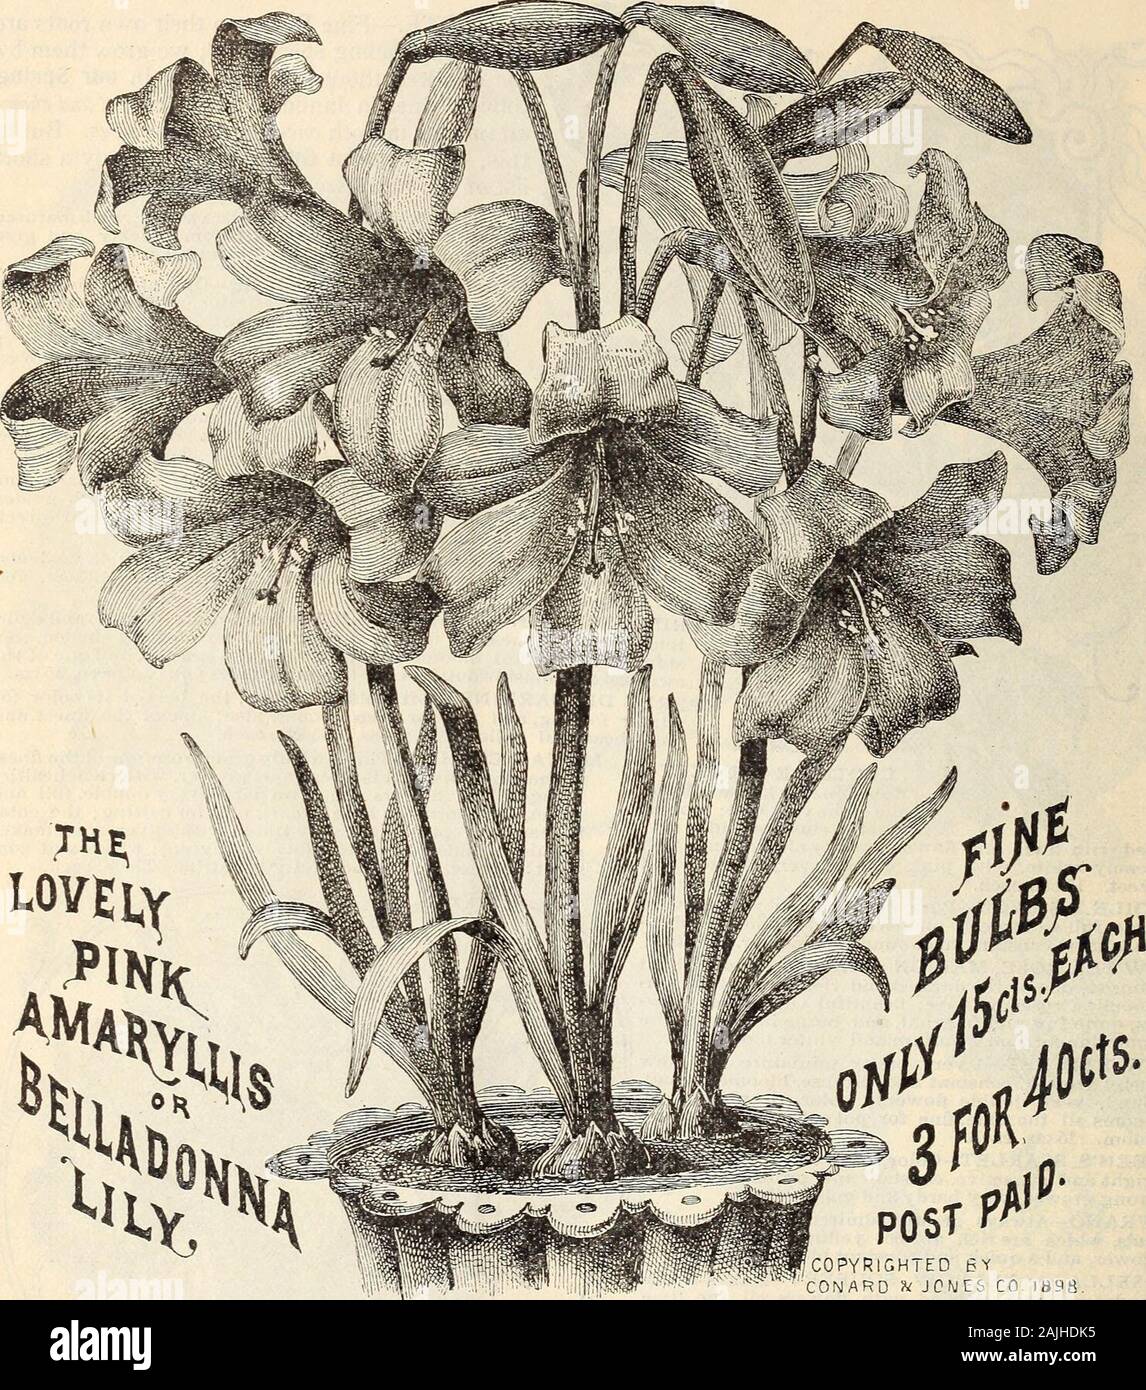 New floral guide : autumn 1899 . ftFMFMTlPl^ These are extra strong: re-potted roses, specially prepared for winteriVLriUl^iTlDHV flowering. Price 15c. each, 2 for 25c., 4 for 50c., 8 for $1.00. Set of 16 for $2.00, postpaid, or by express, purchaser paying charges, 8 for 75c., 16 for $1.50, $8.00 per hundred. NOTE.—Good ordinary size roses, best varieties, all labeled, 4 for 25c., 9 for 50c., 20 for $1.00, postpaid. 6 THE CONARD & JONES COMPANY, WEST GROVE, PA. THE AMARYLLIS, m ol uiHter-Fiowtniifl Buite. MAY BE KEPT IN POTS ALL THE YEAR ROUND OR BEDDED OUT IN SUHflER.. LOVELY BELILADOISNA LI Stock Photo